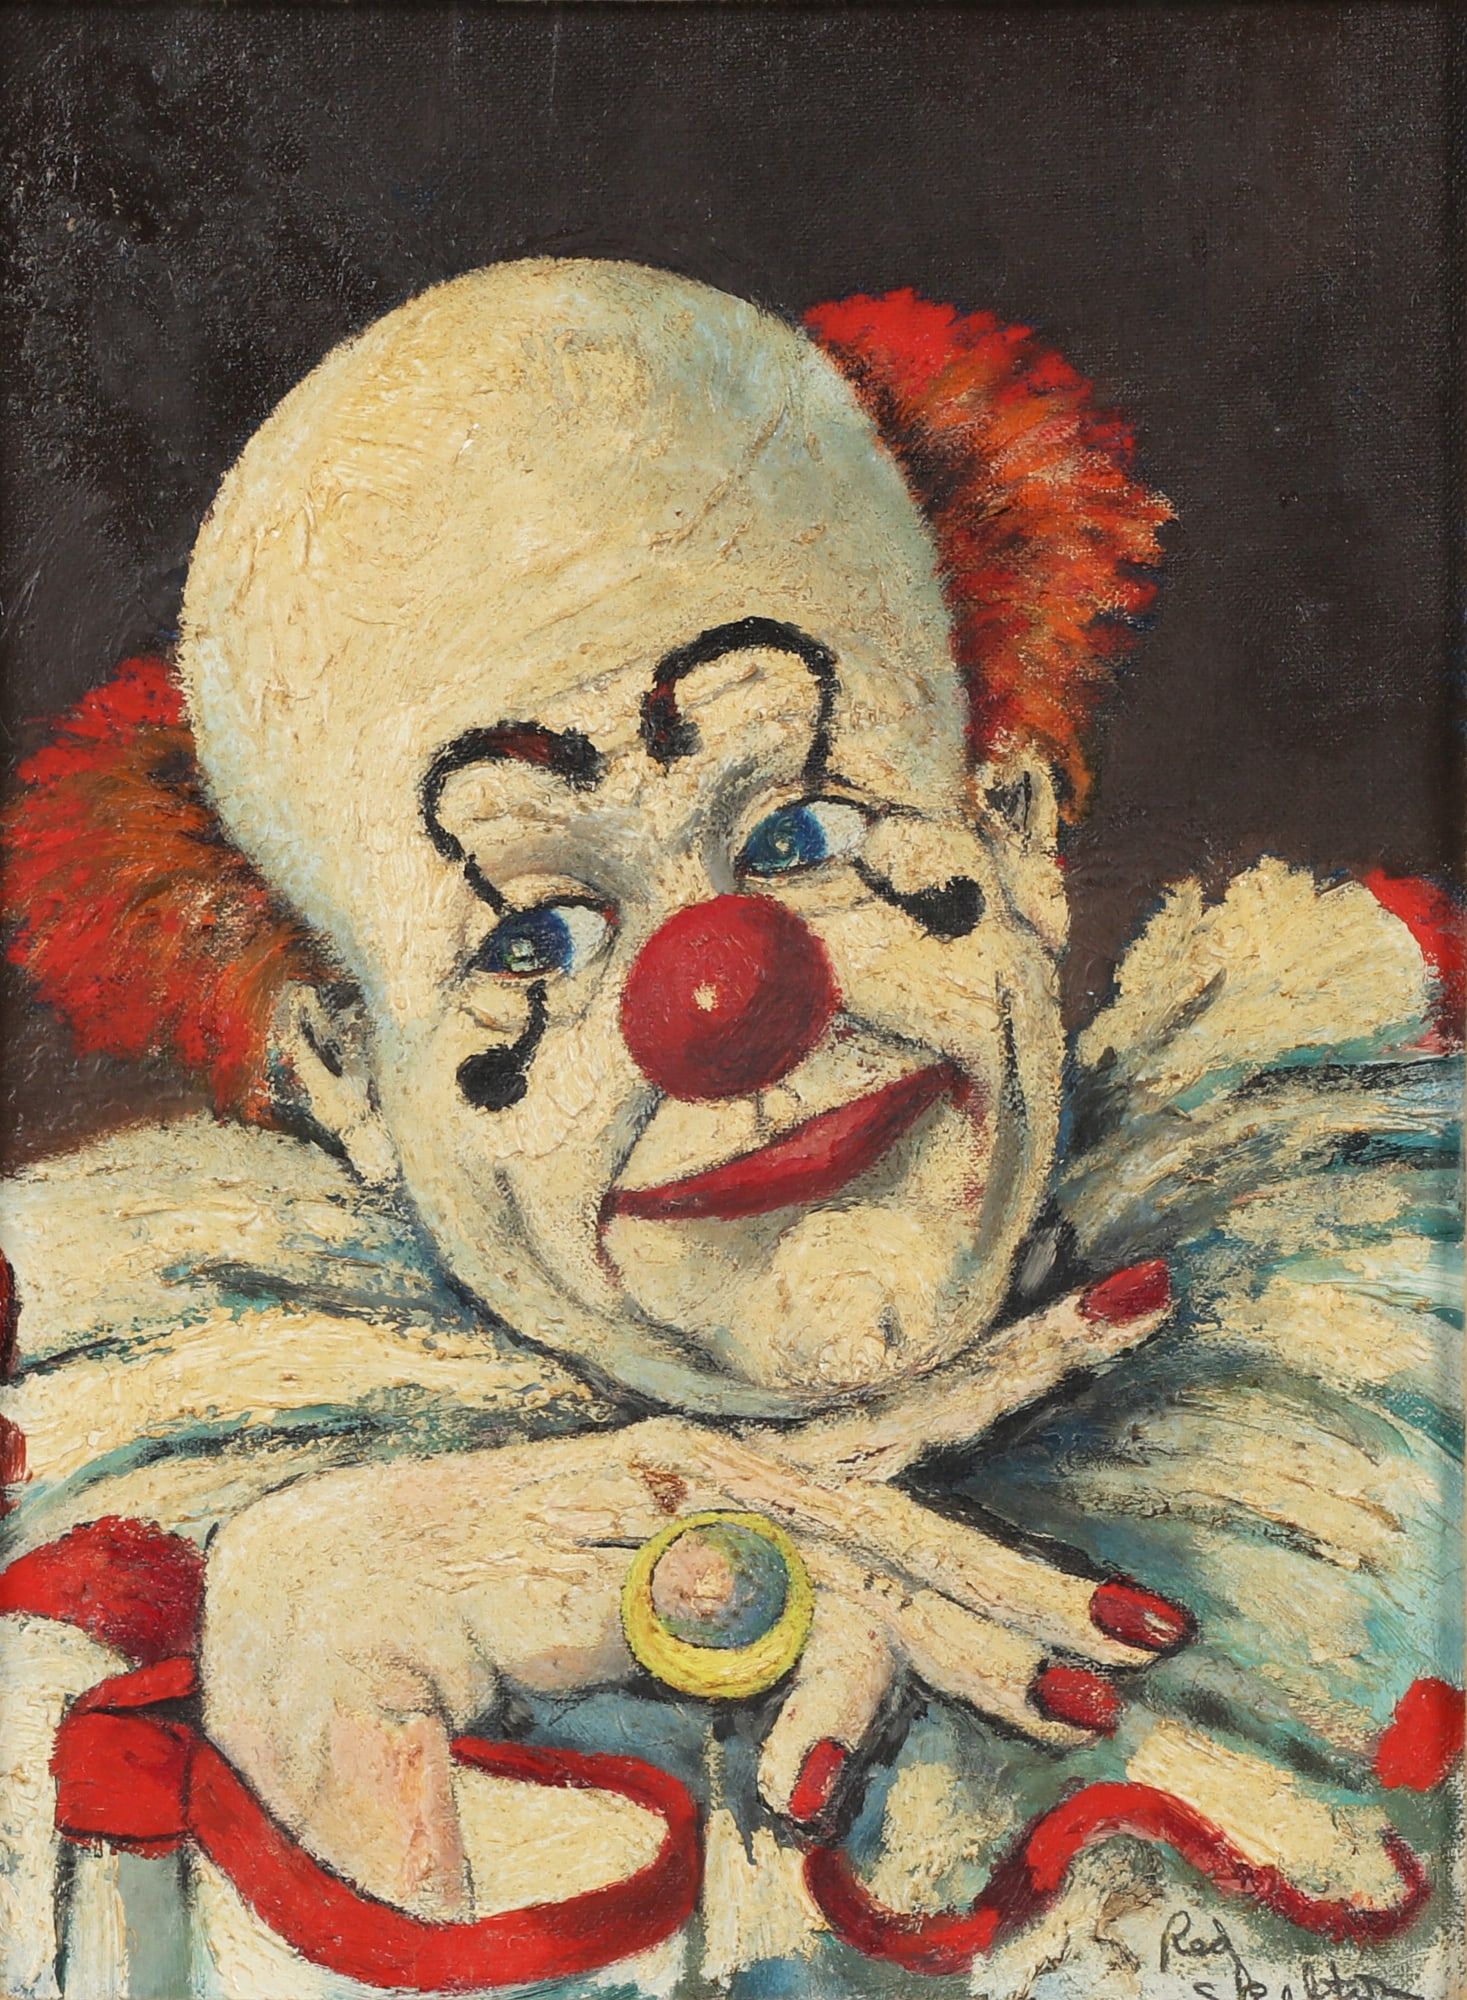 RED SKELTON, CLOWN WITH A PINKY